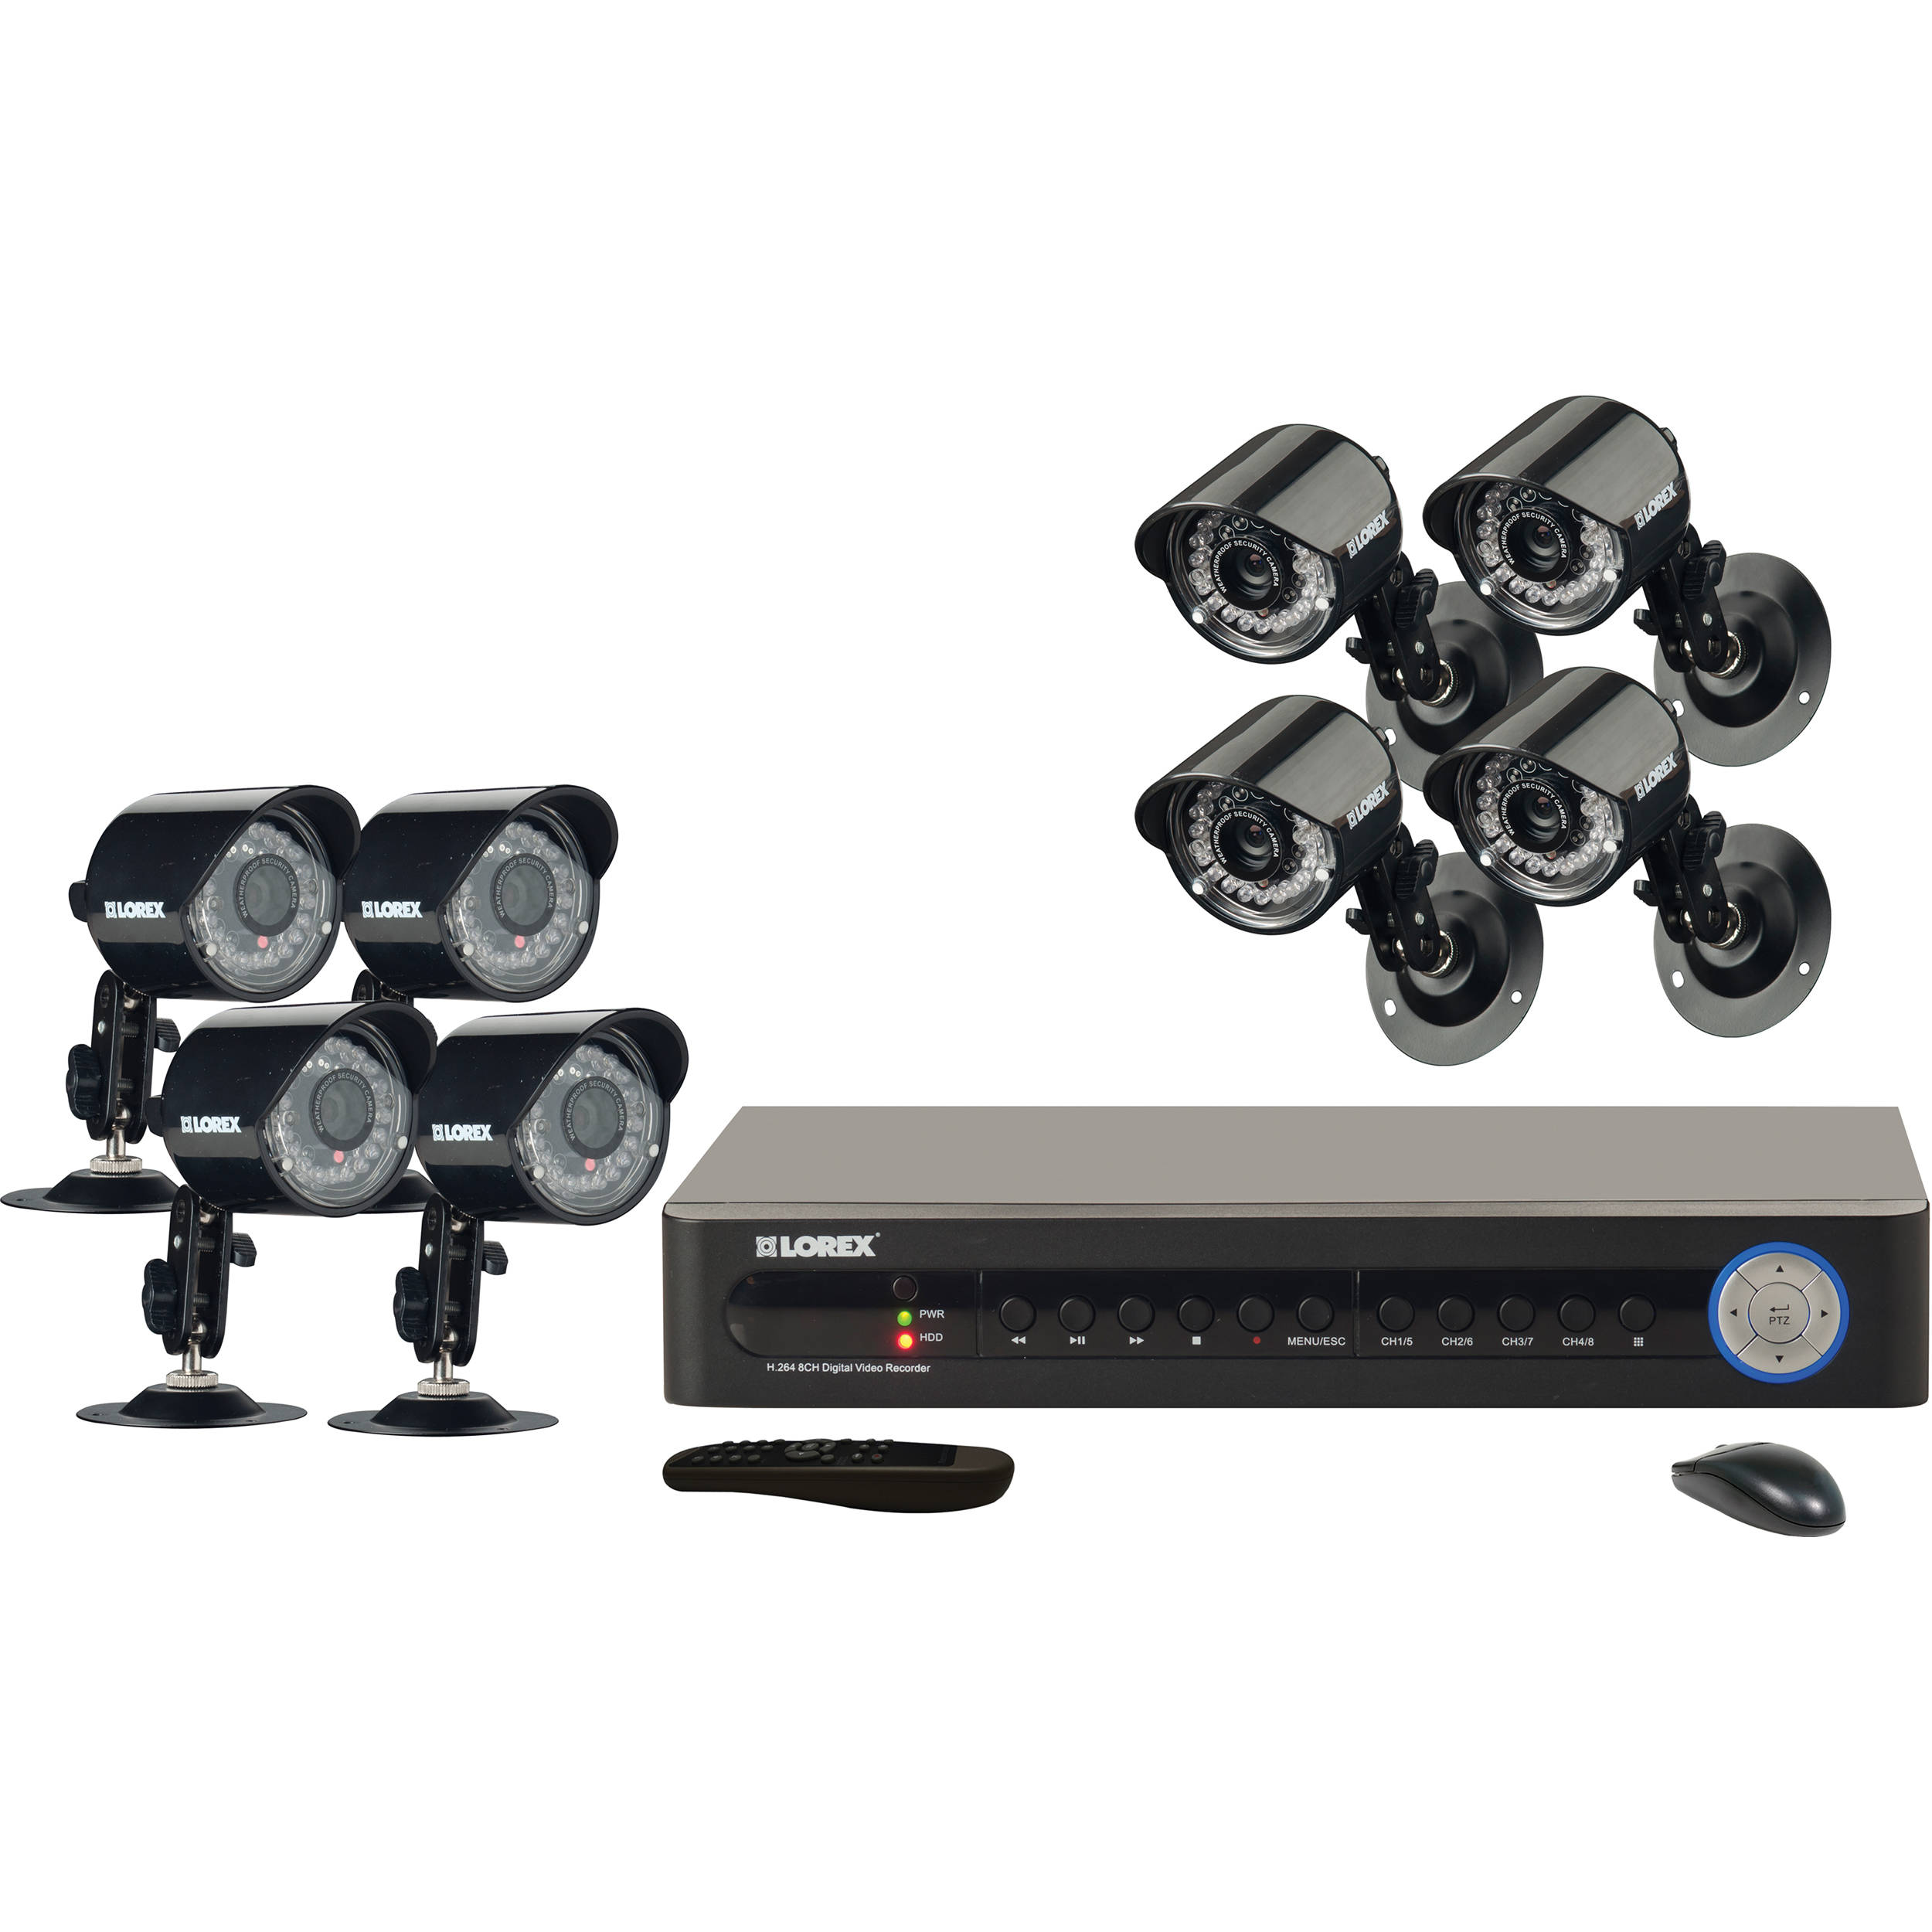 linux based security camera system